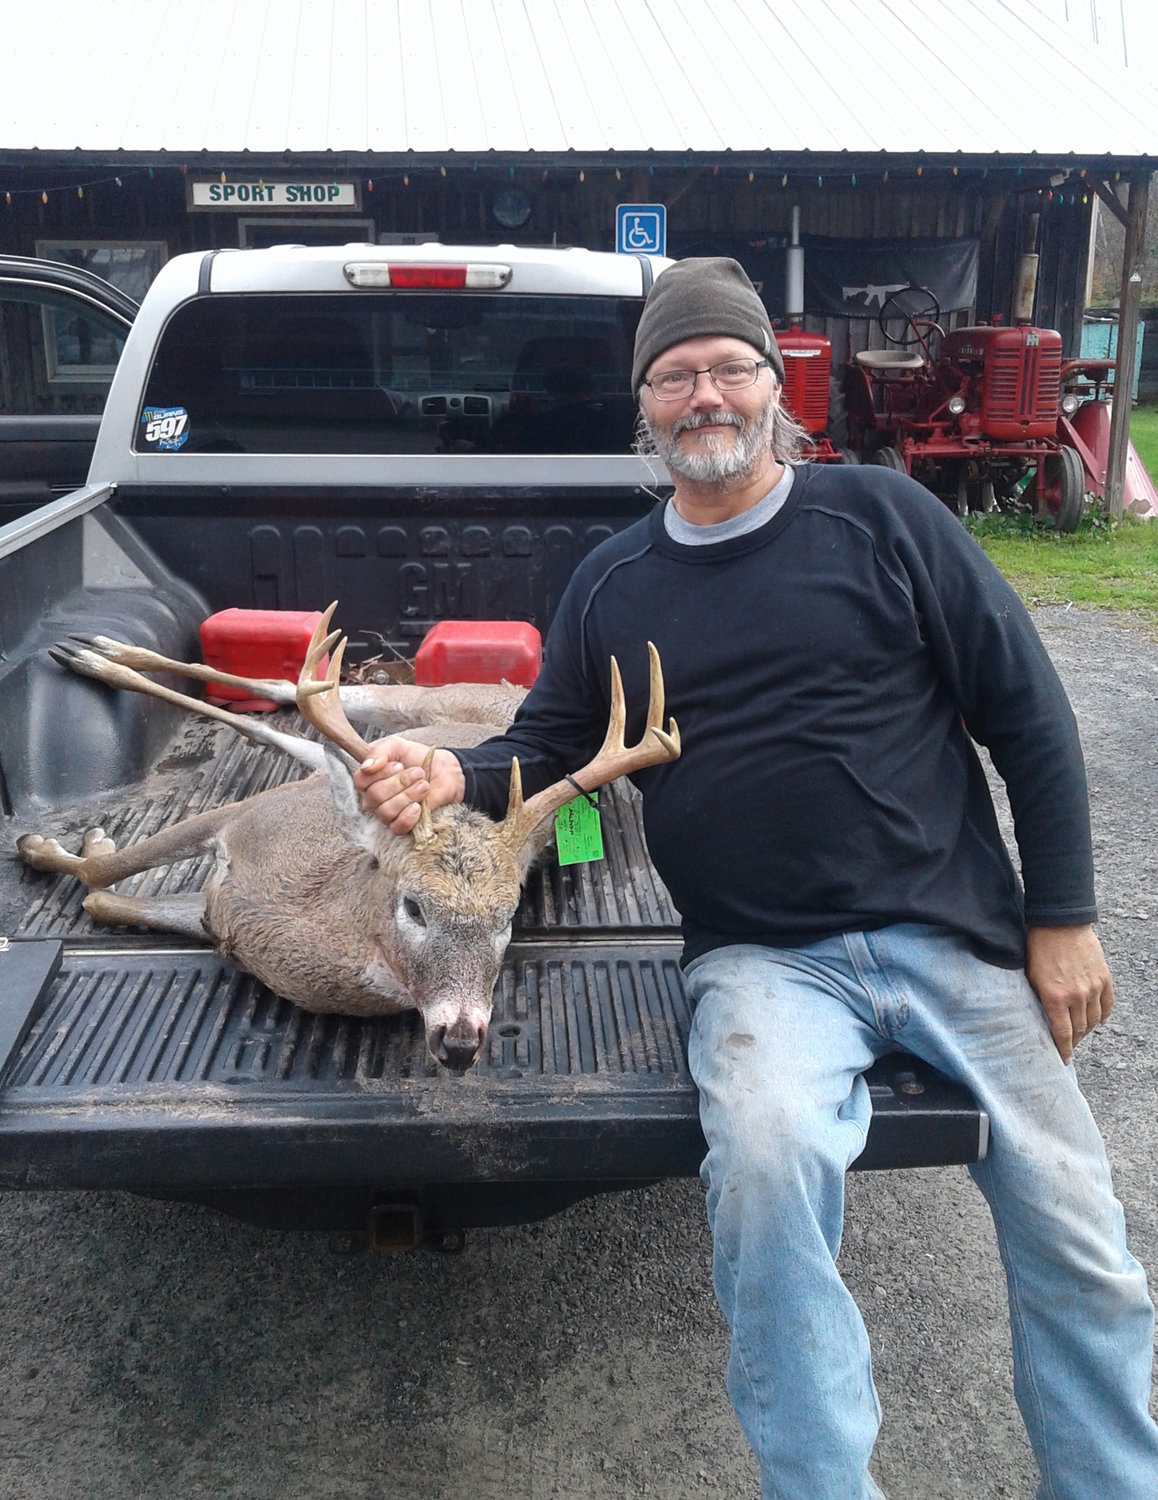 Robert Burns took this 10 point buck on 10-28-21 in the Town of Thompson. The deer scored a 58.75.